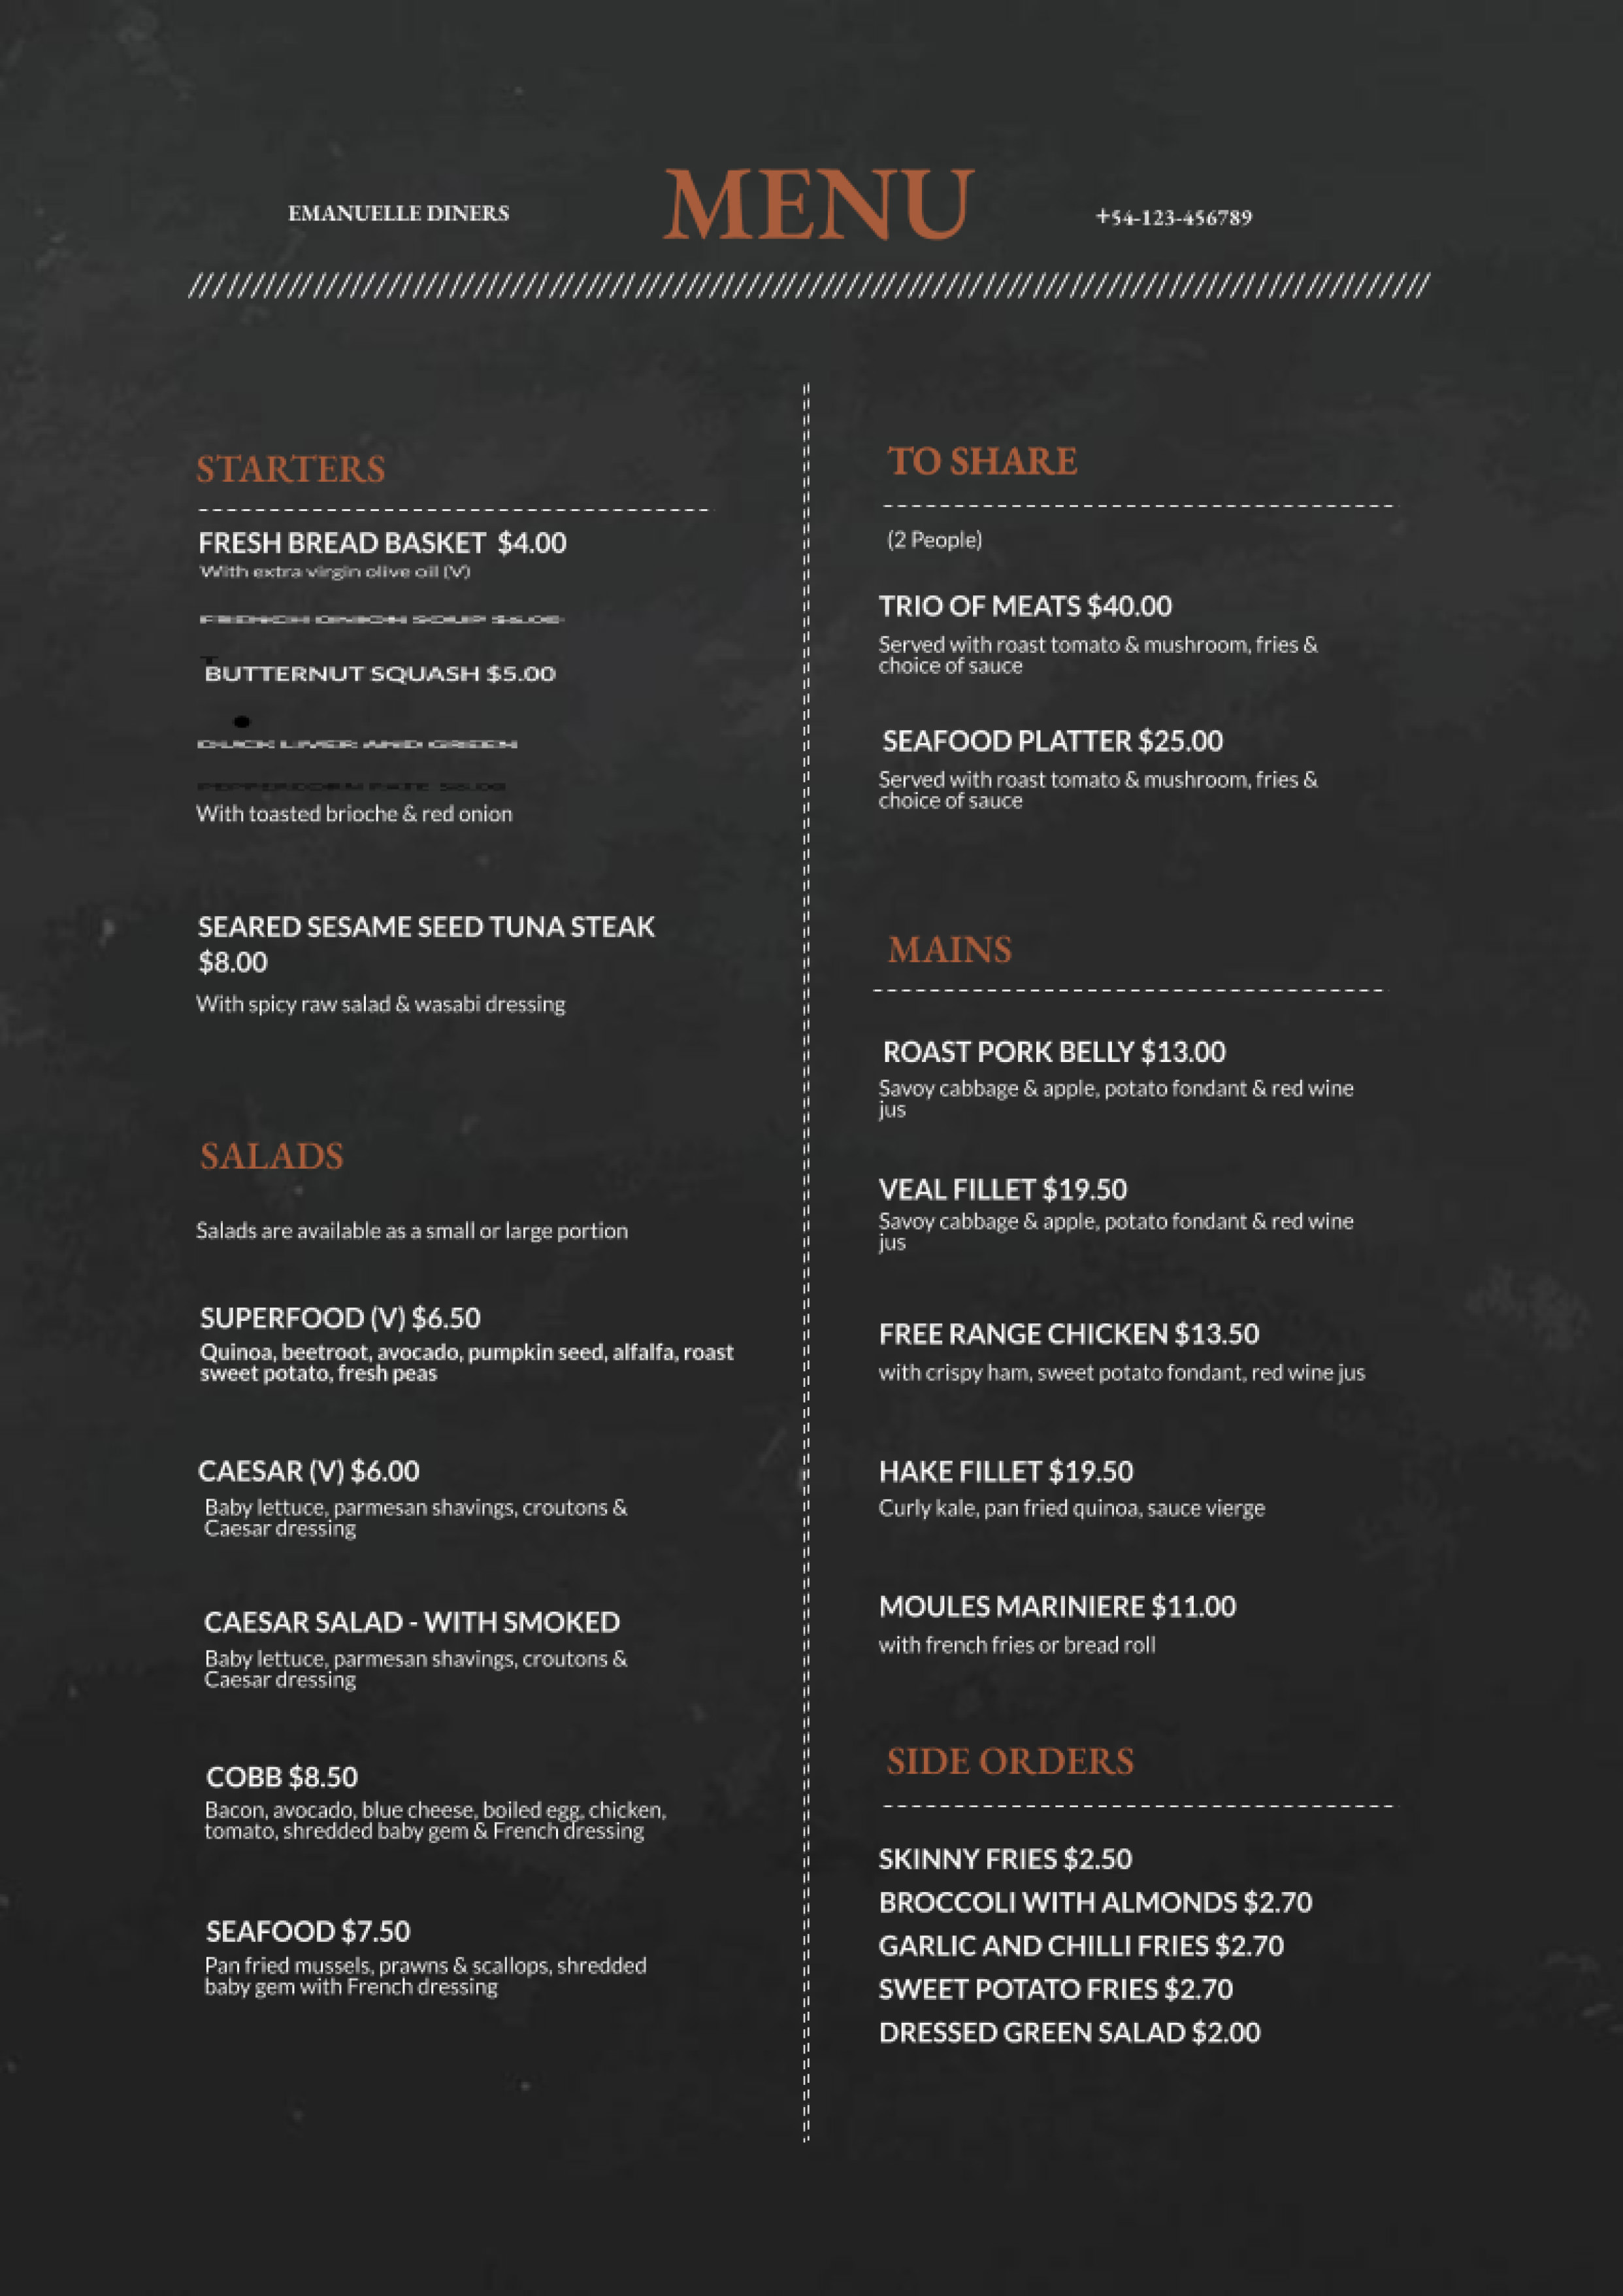 20 Free Simple Menu Templates For Restaurants, Cafes, And Parties For Google Docs Menu Template